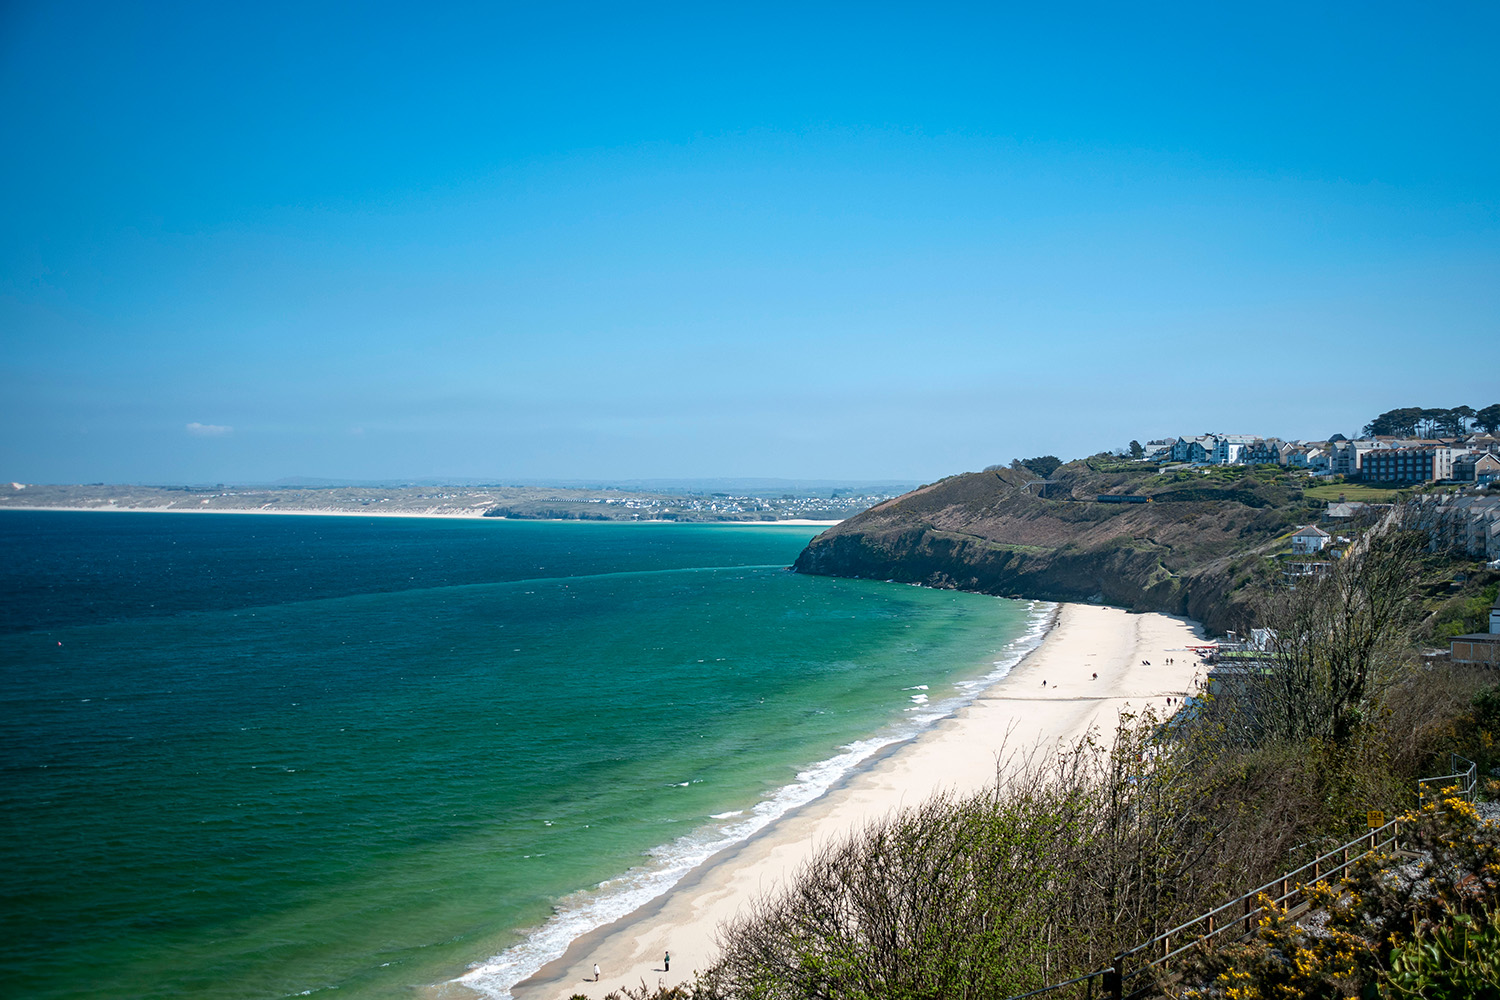  Carbis Bay, St Ives in Cornwall